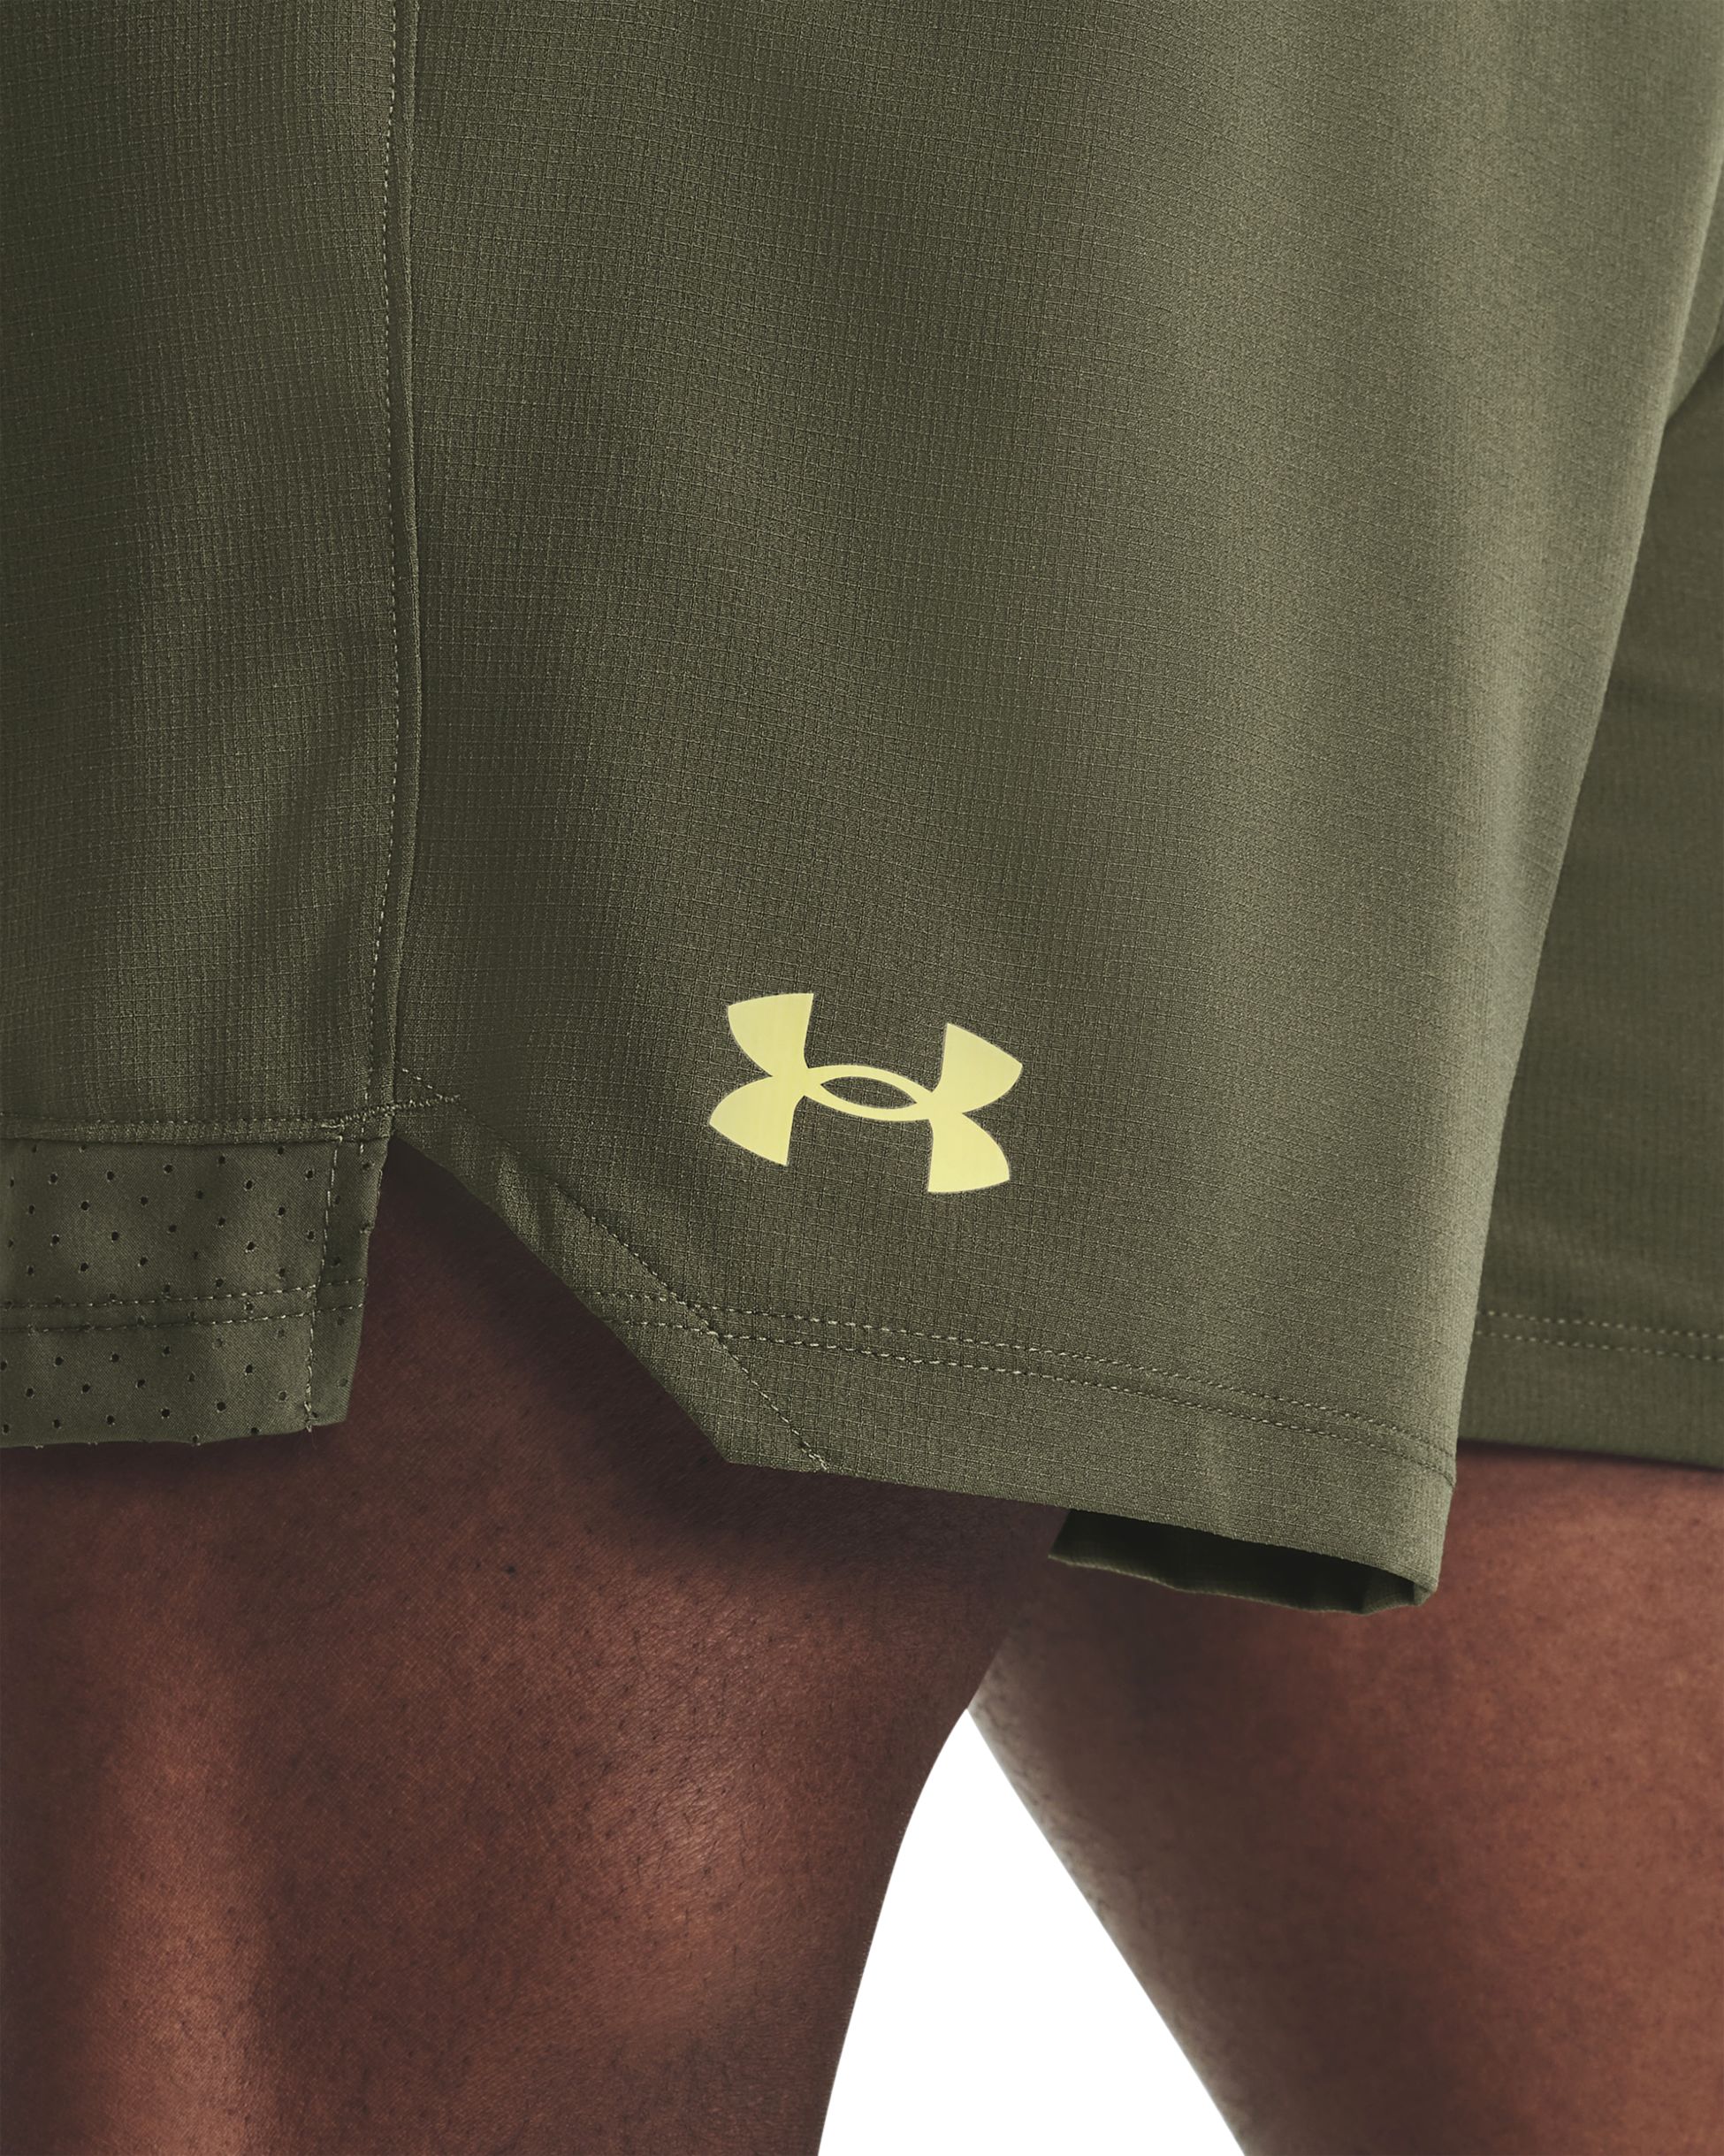 UNDER ARMOUR, M UA VANISH WOVEN 6IN SHORTS